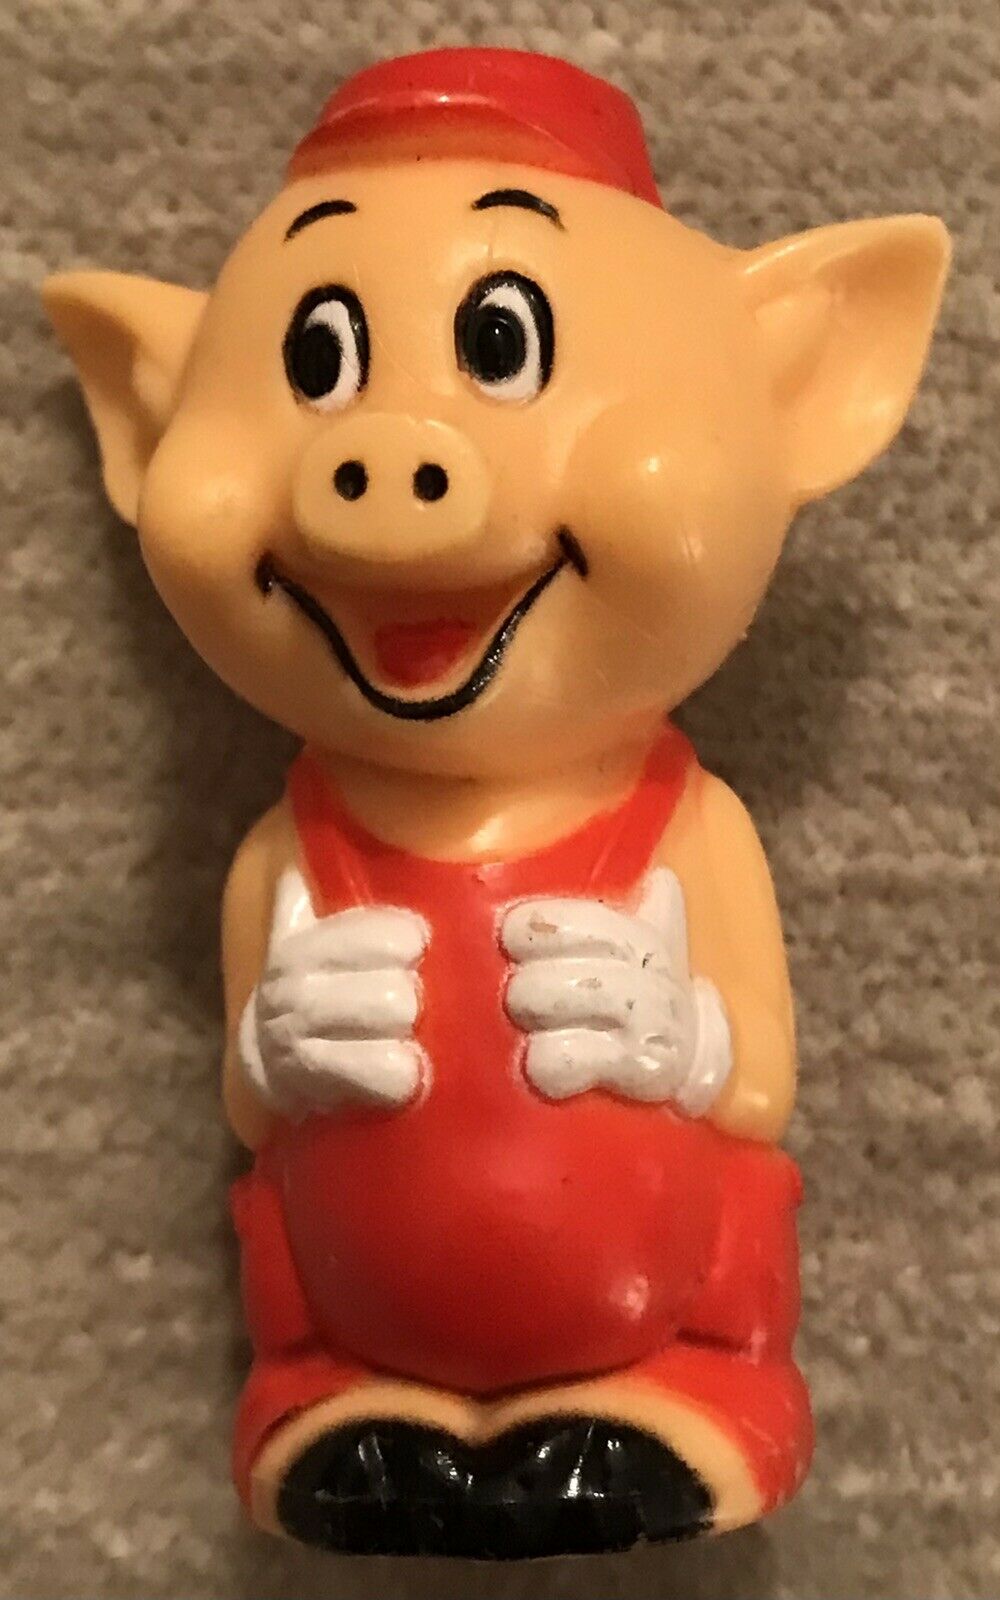 Vintage Disney Story Of The Three Little Pigs, Red Pig Plastic Toy Pencil Topper